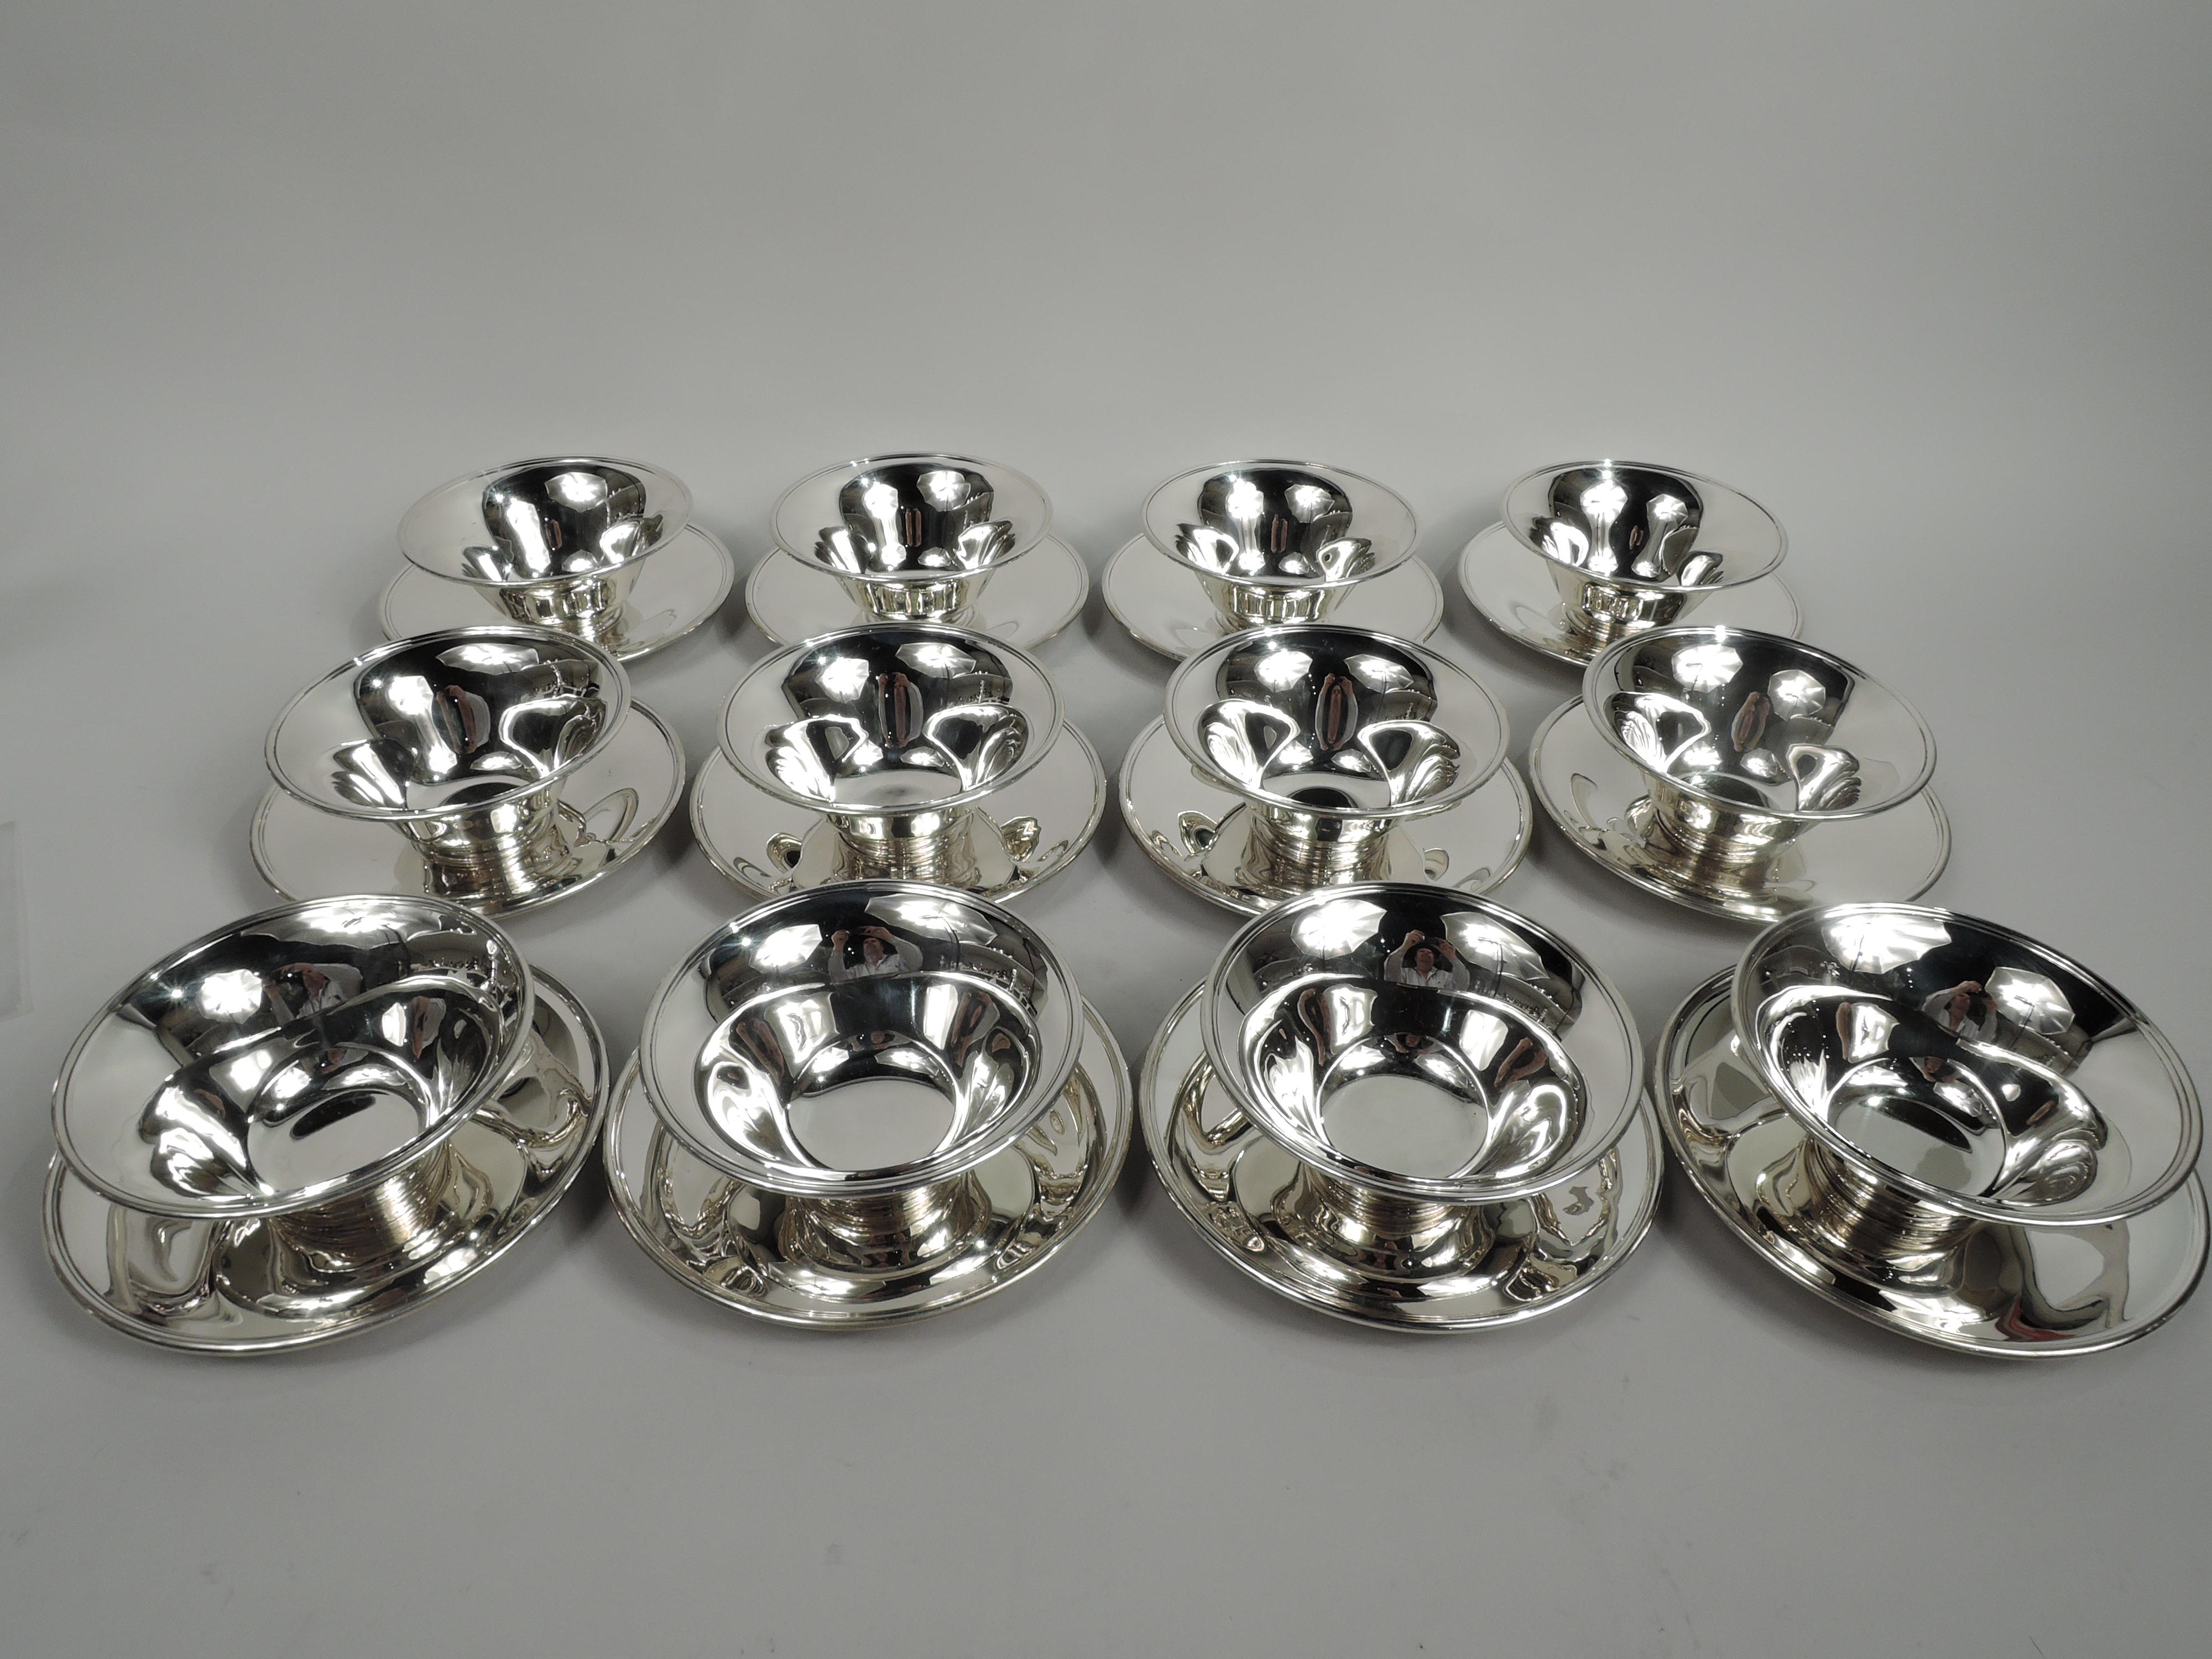 Set of 12 Modern sterling silver dessert sets. Made by Tiffany & Co. in New York, ca 1912. Each bowl: Tapering sides with flared rim and curved bottom; short and stepped foot. Each plate: Circular well with wide and tapering shoulder. Fluid and